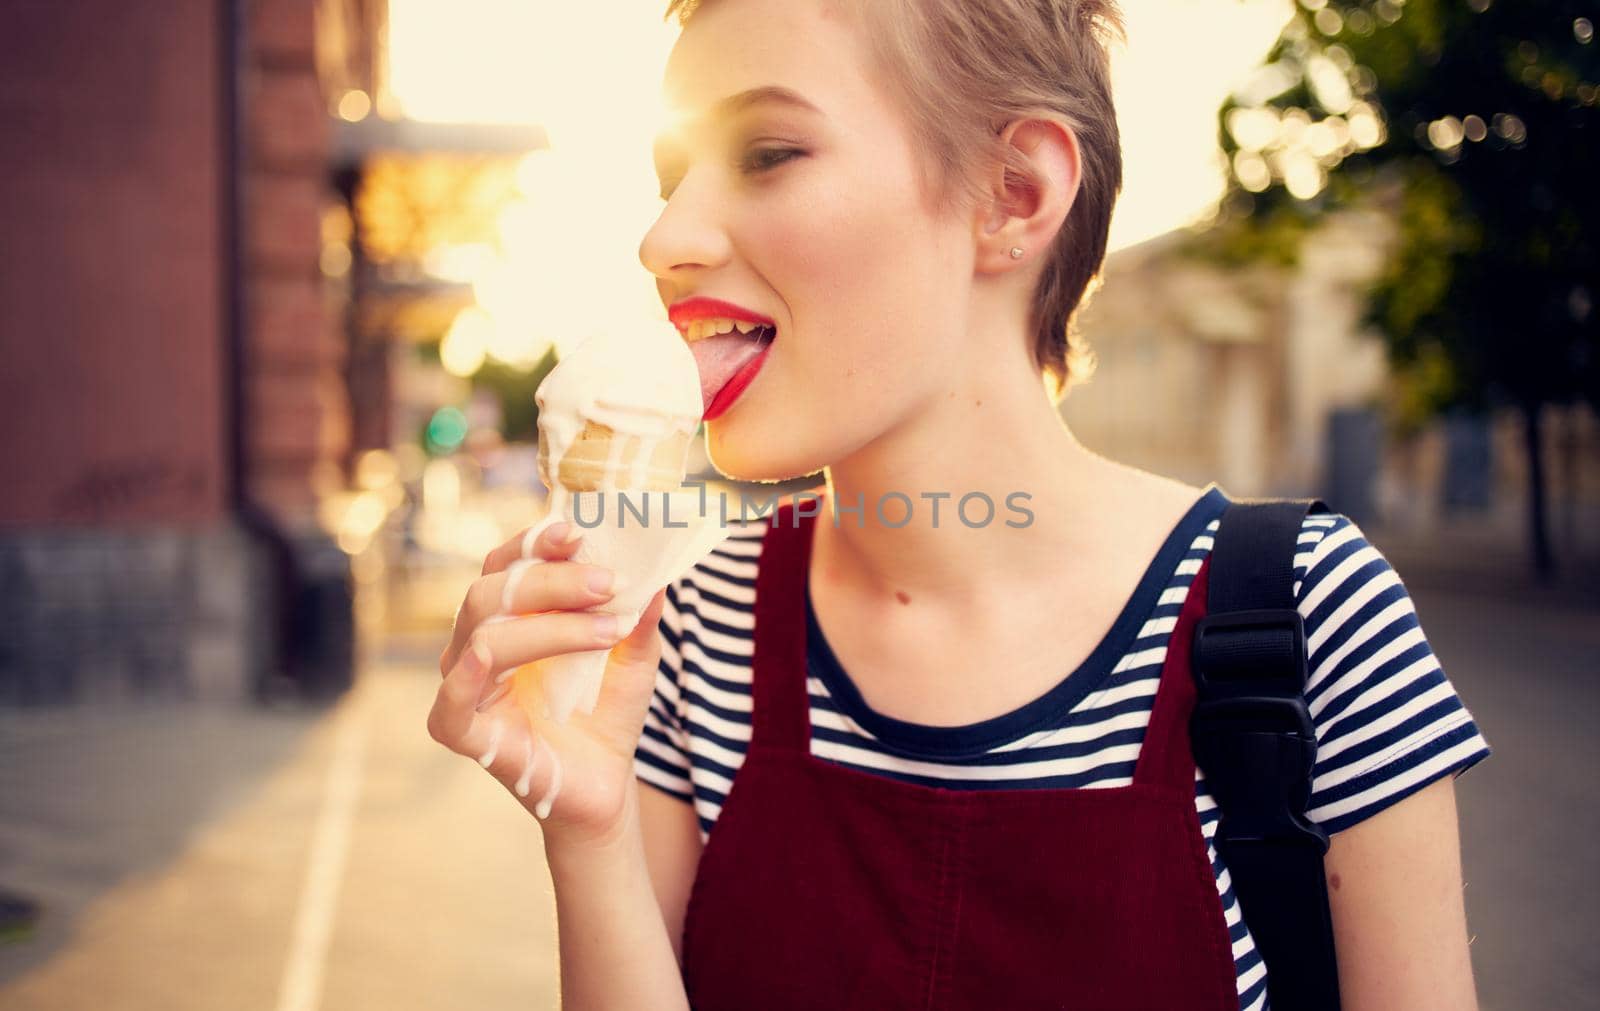 pretty woman with short hair eating ice cream outdoors leisure walk. High quality photo